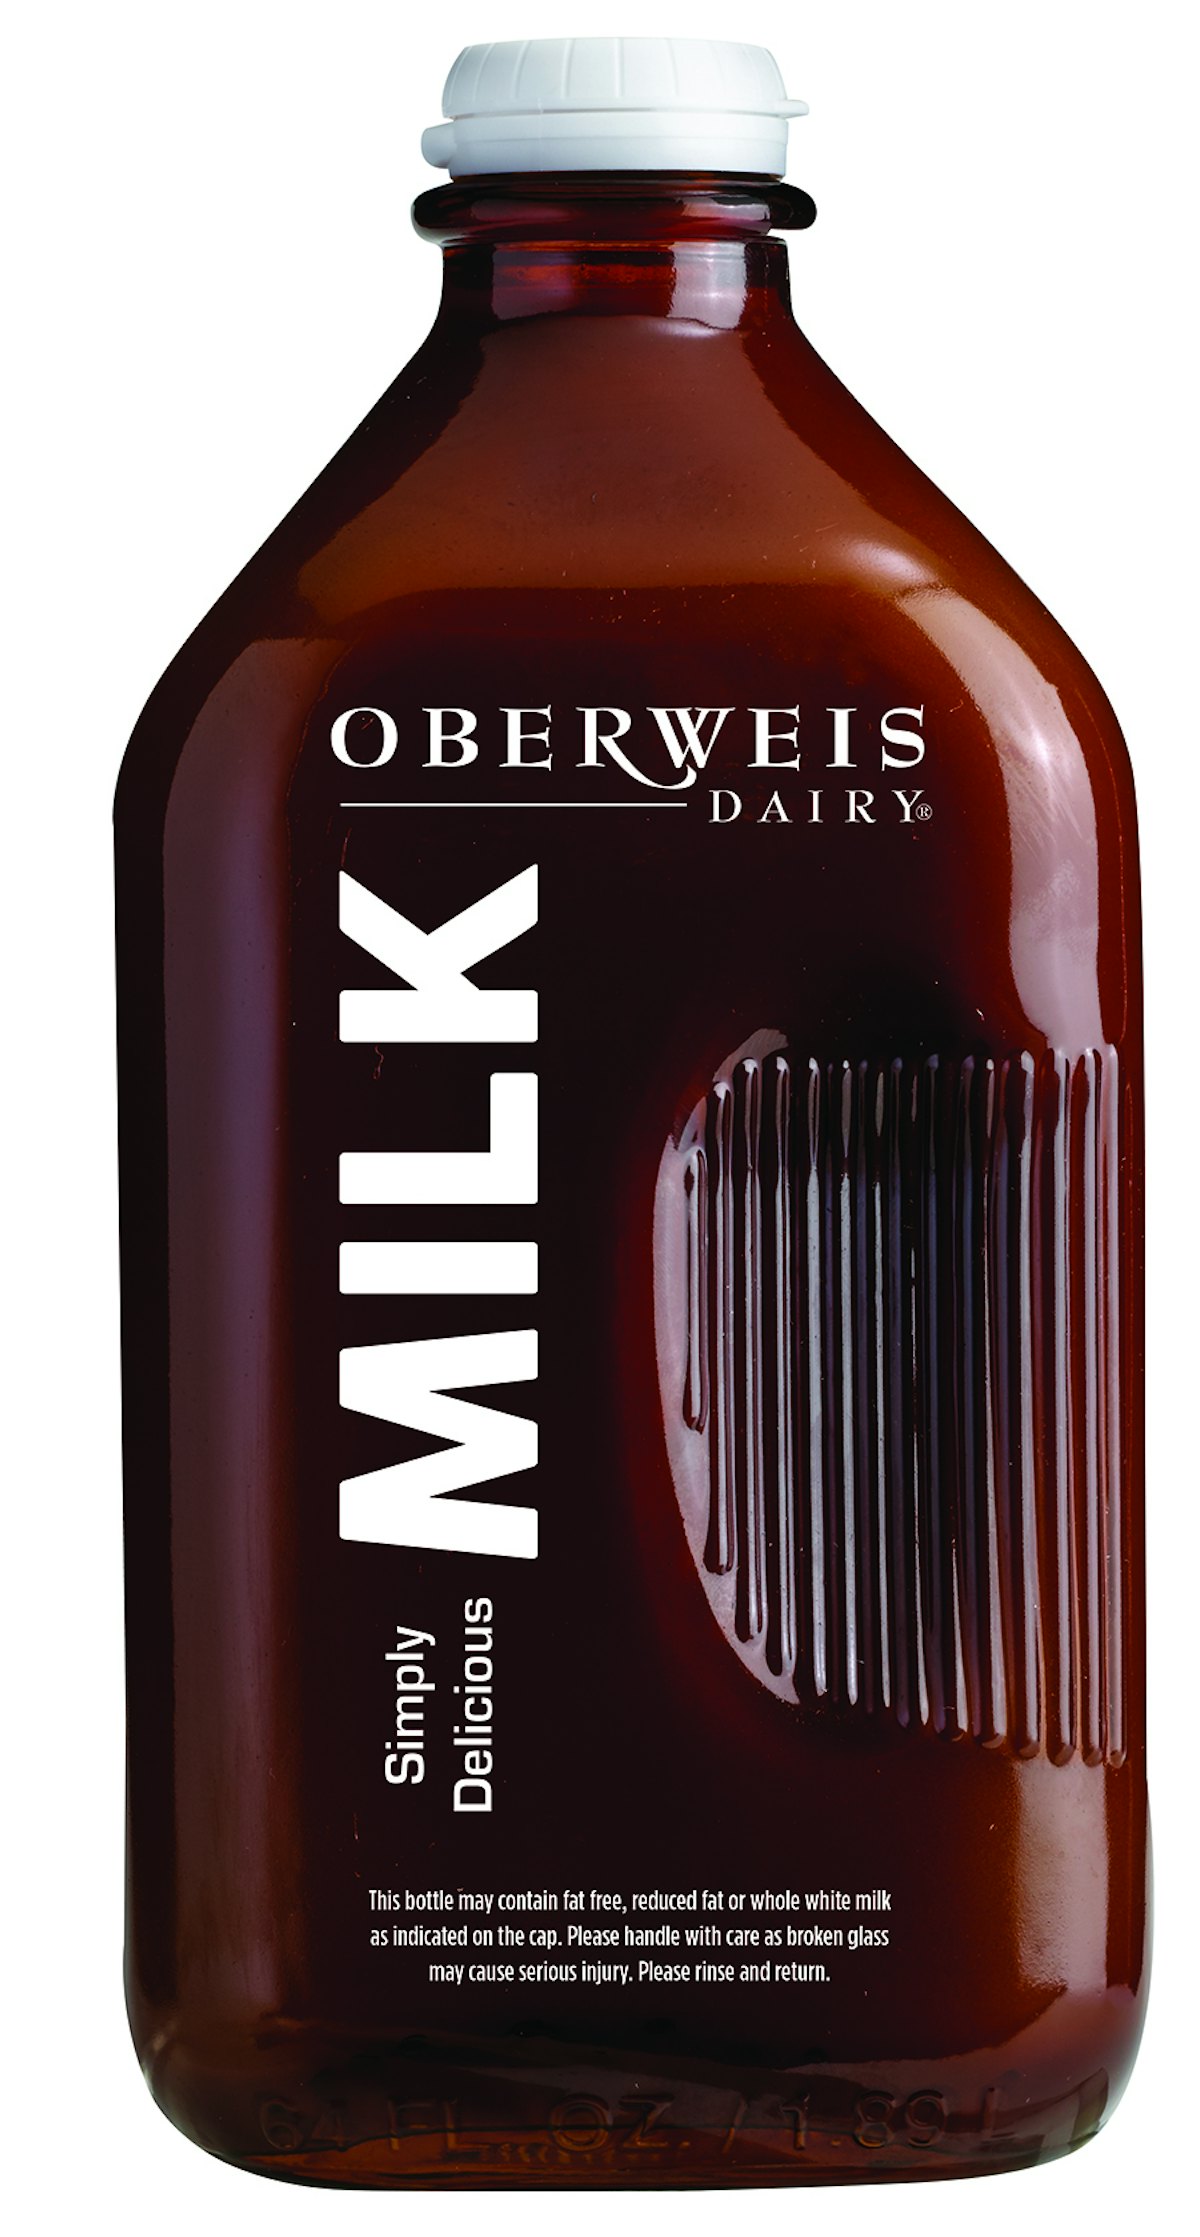 Oberweis sees the light and switches to amber bottles for milk